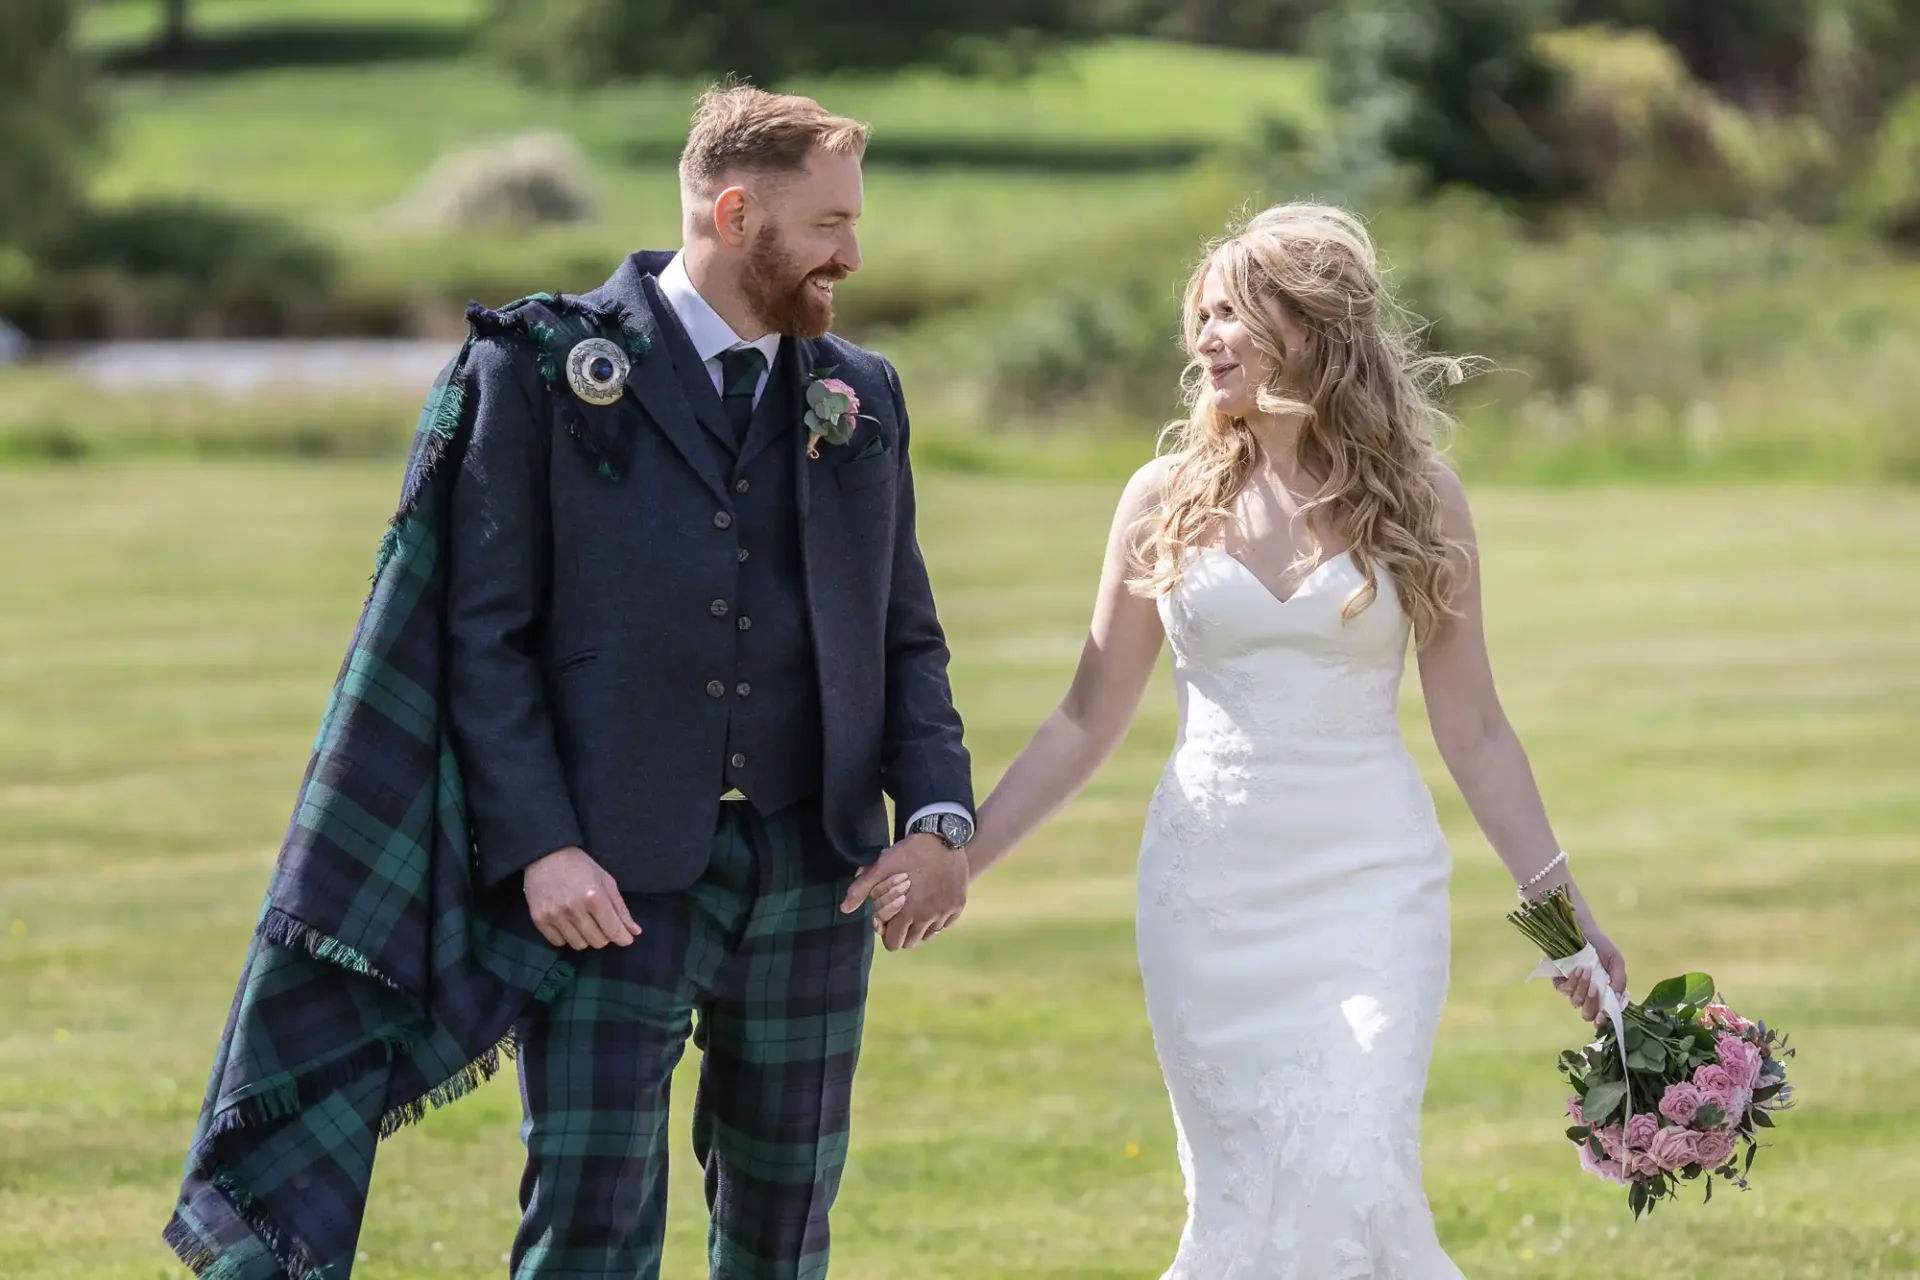 A bride and groom in wedding attire, walking hand-in-hand across a grassy field, the groom in a kilt, both smiling joyfully.